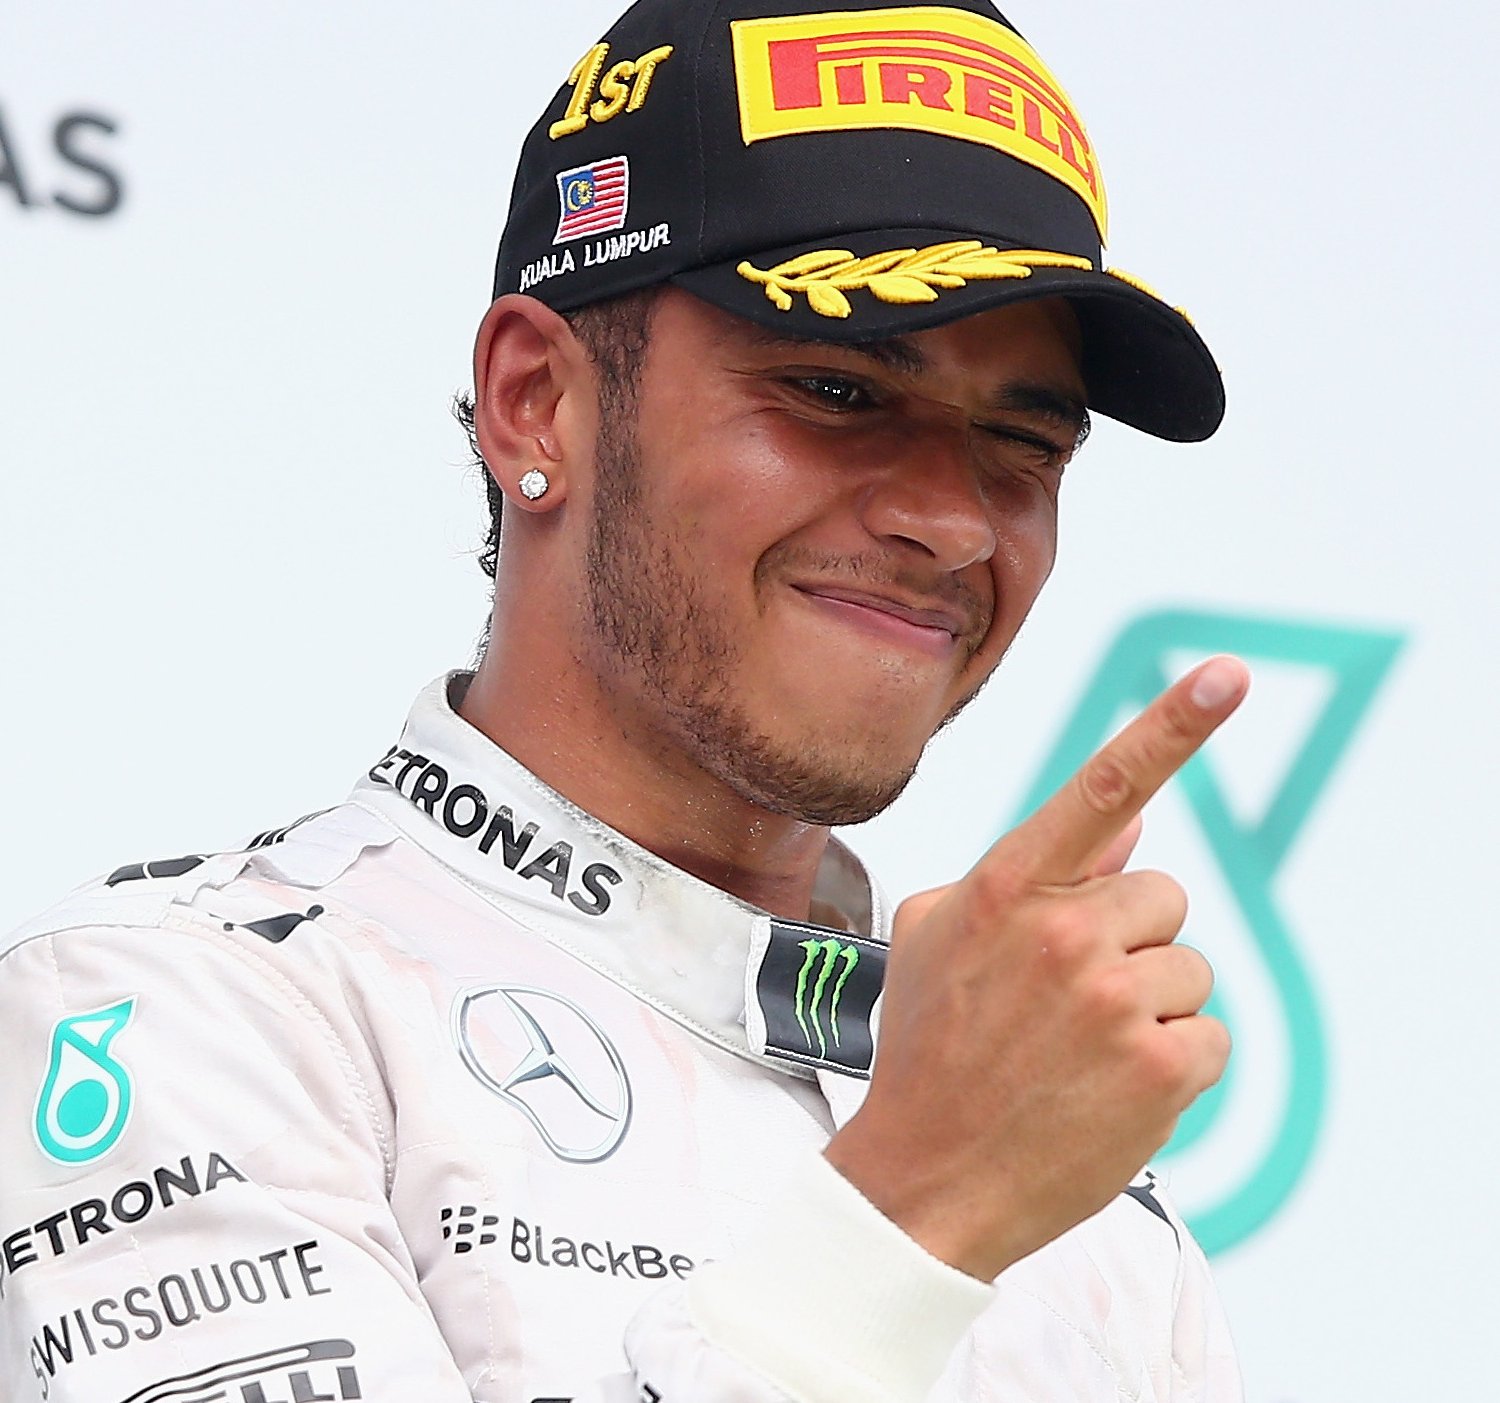 Lewis Hamilton's Win for Mercedes at 2014 Malaysian Grand Prix Inspires